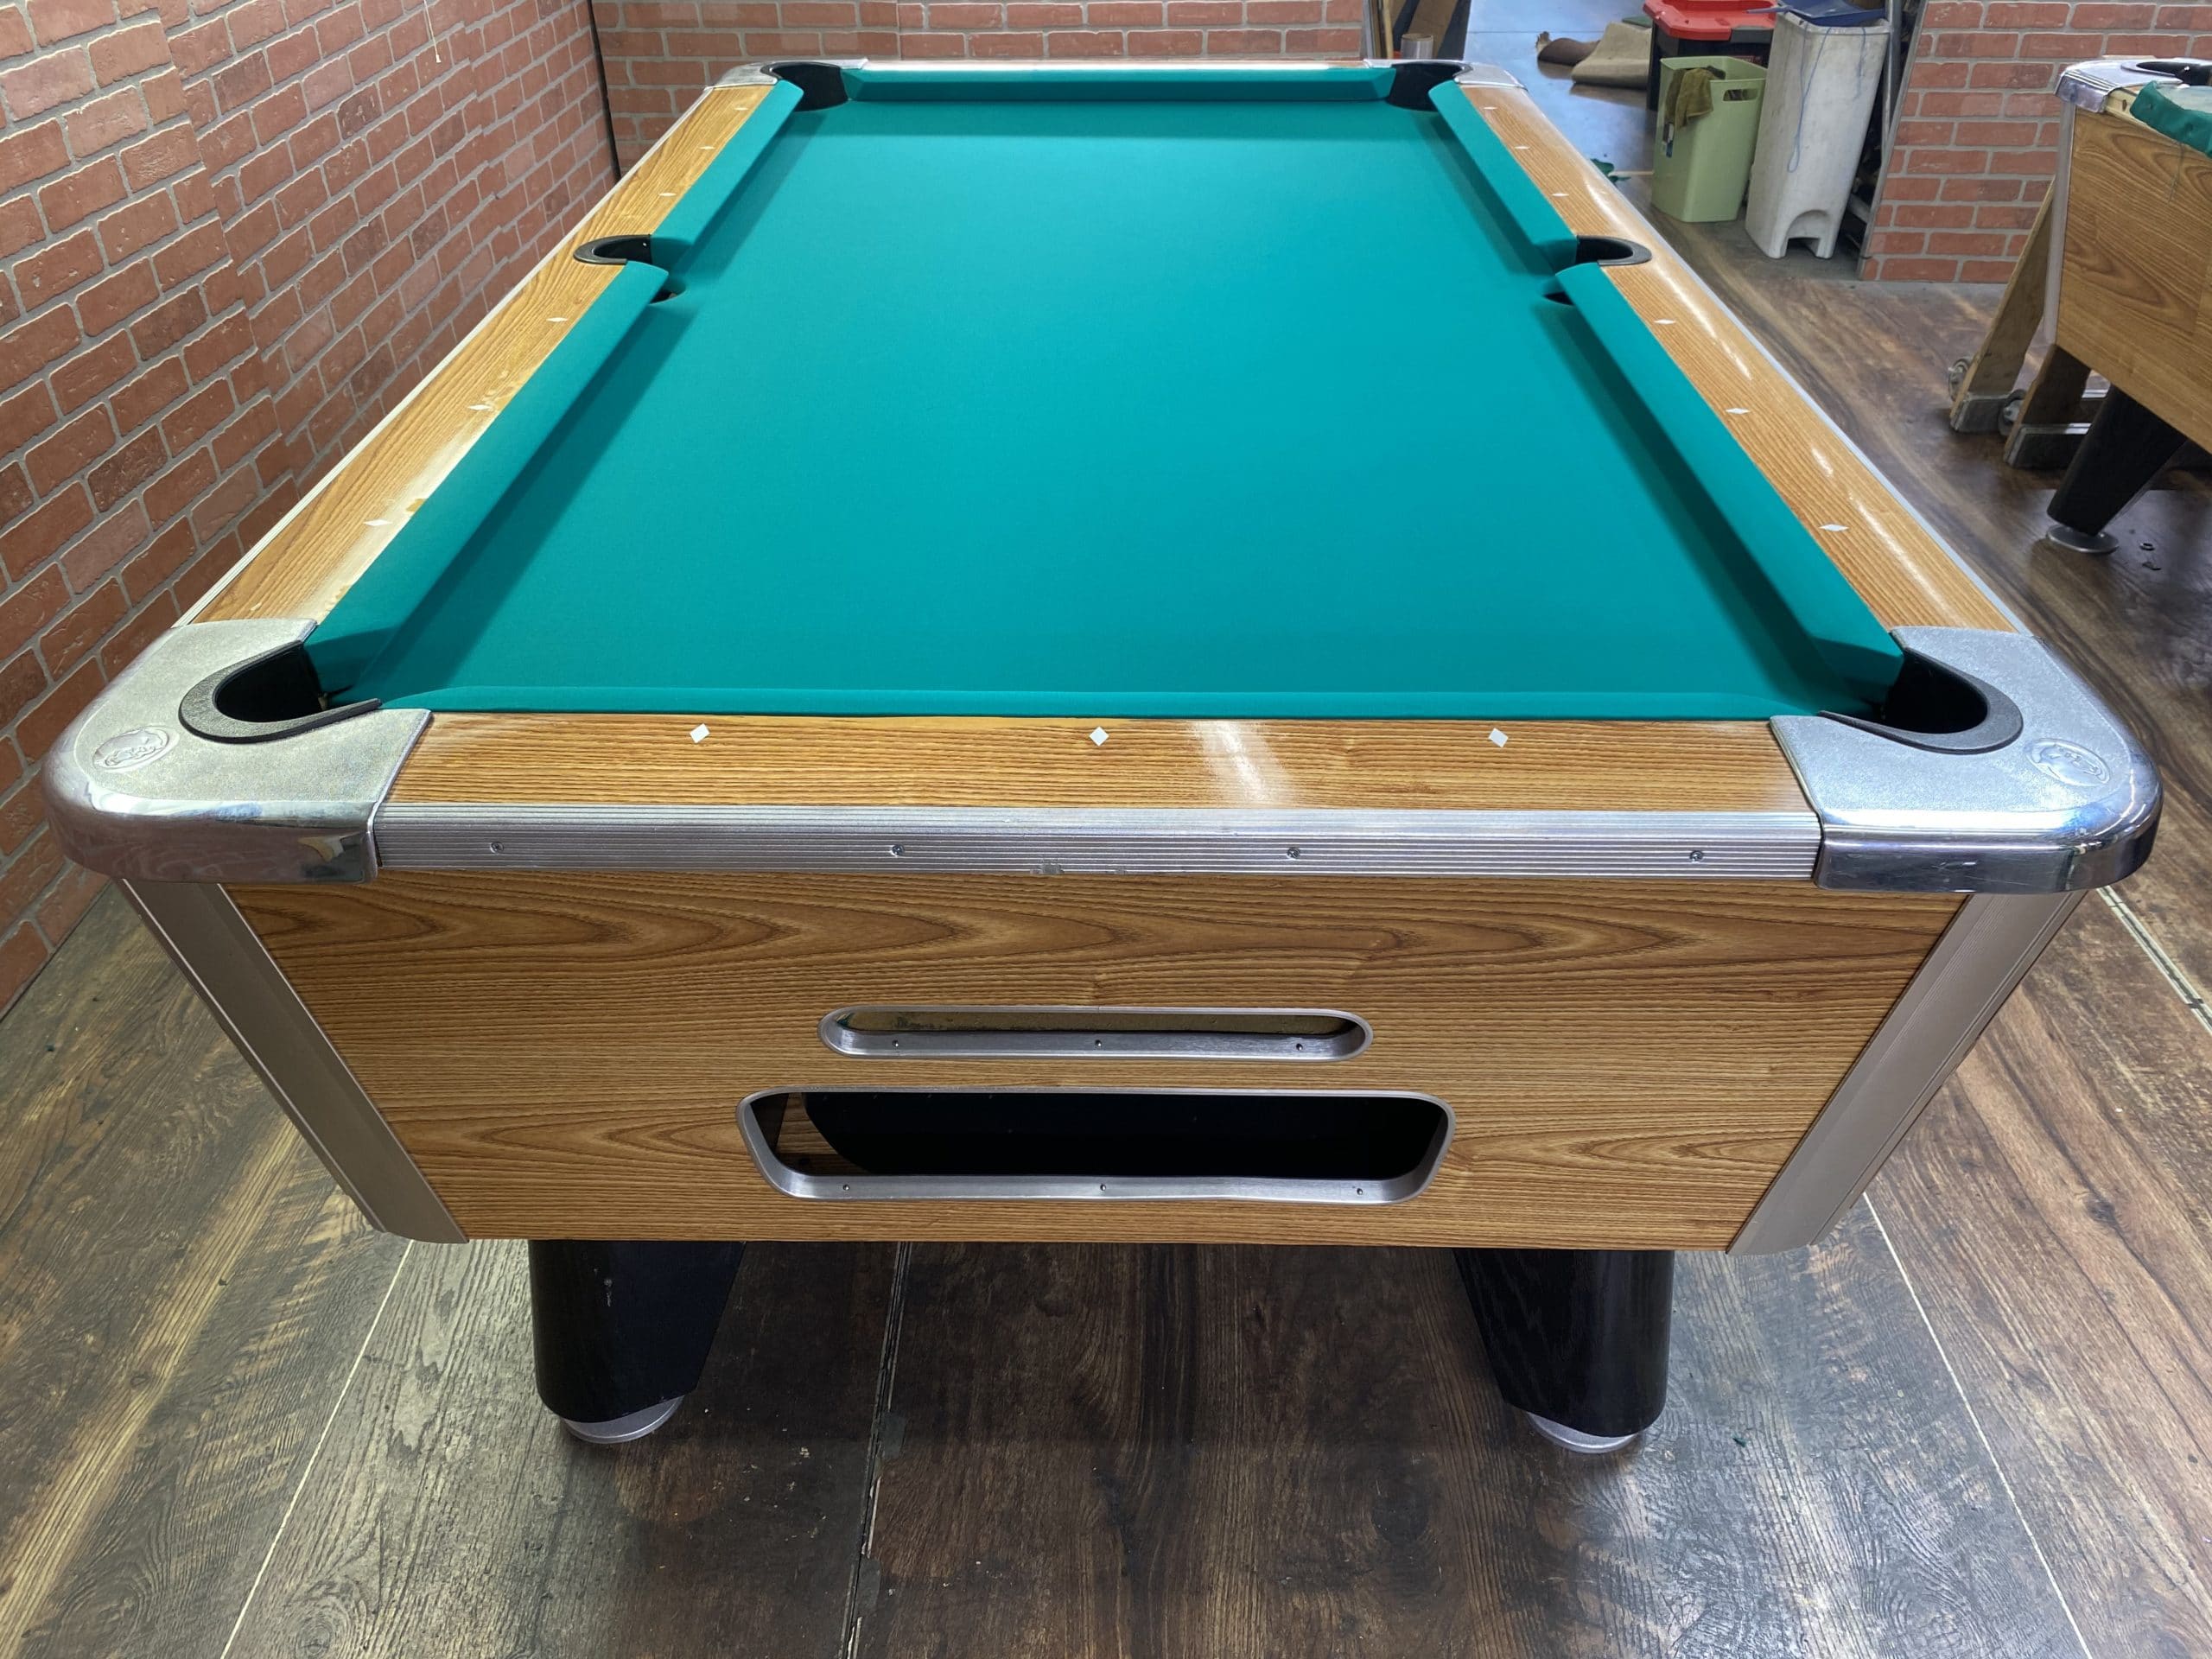 Pool Tables Used As Dining Room Tables